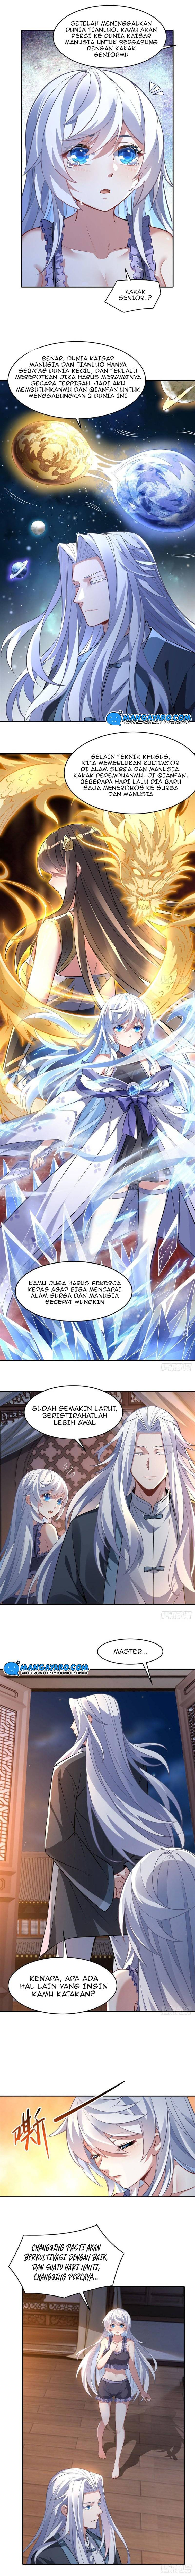 Dilarang COPAS - situs resmi www.mangacanblog.com - Komik my female apprentices are all big shots from the future 075 - chapter 75 76 Indonesia my female apprentices are all big shots from the future 075 - chapter 75 Terbaru 4|Baca Manga Komik Indonesia|Mangacan